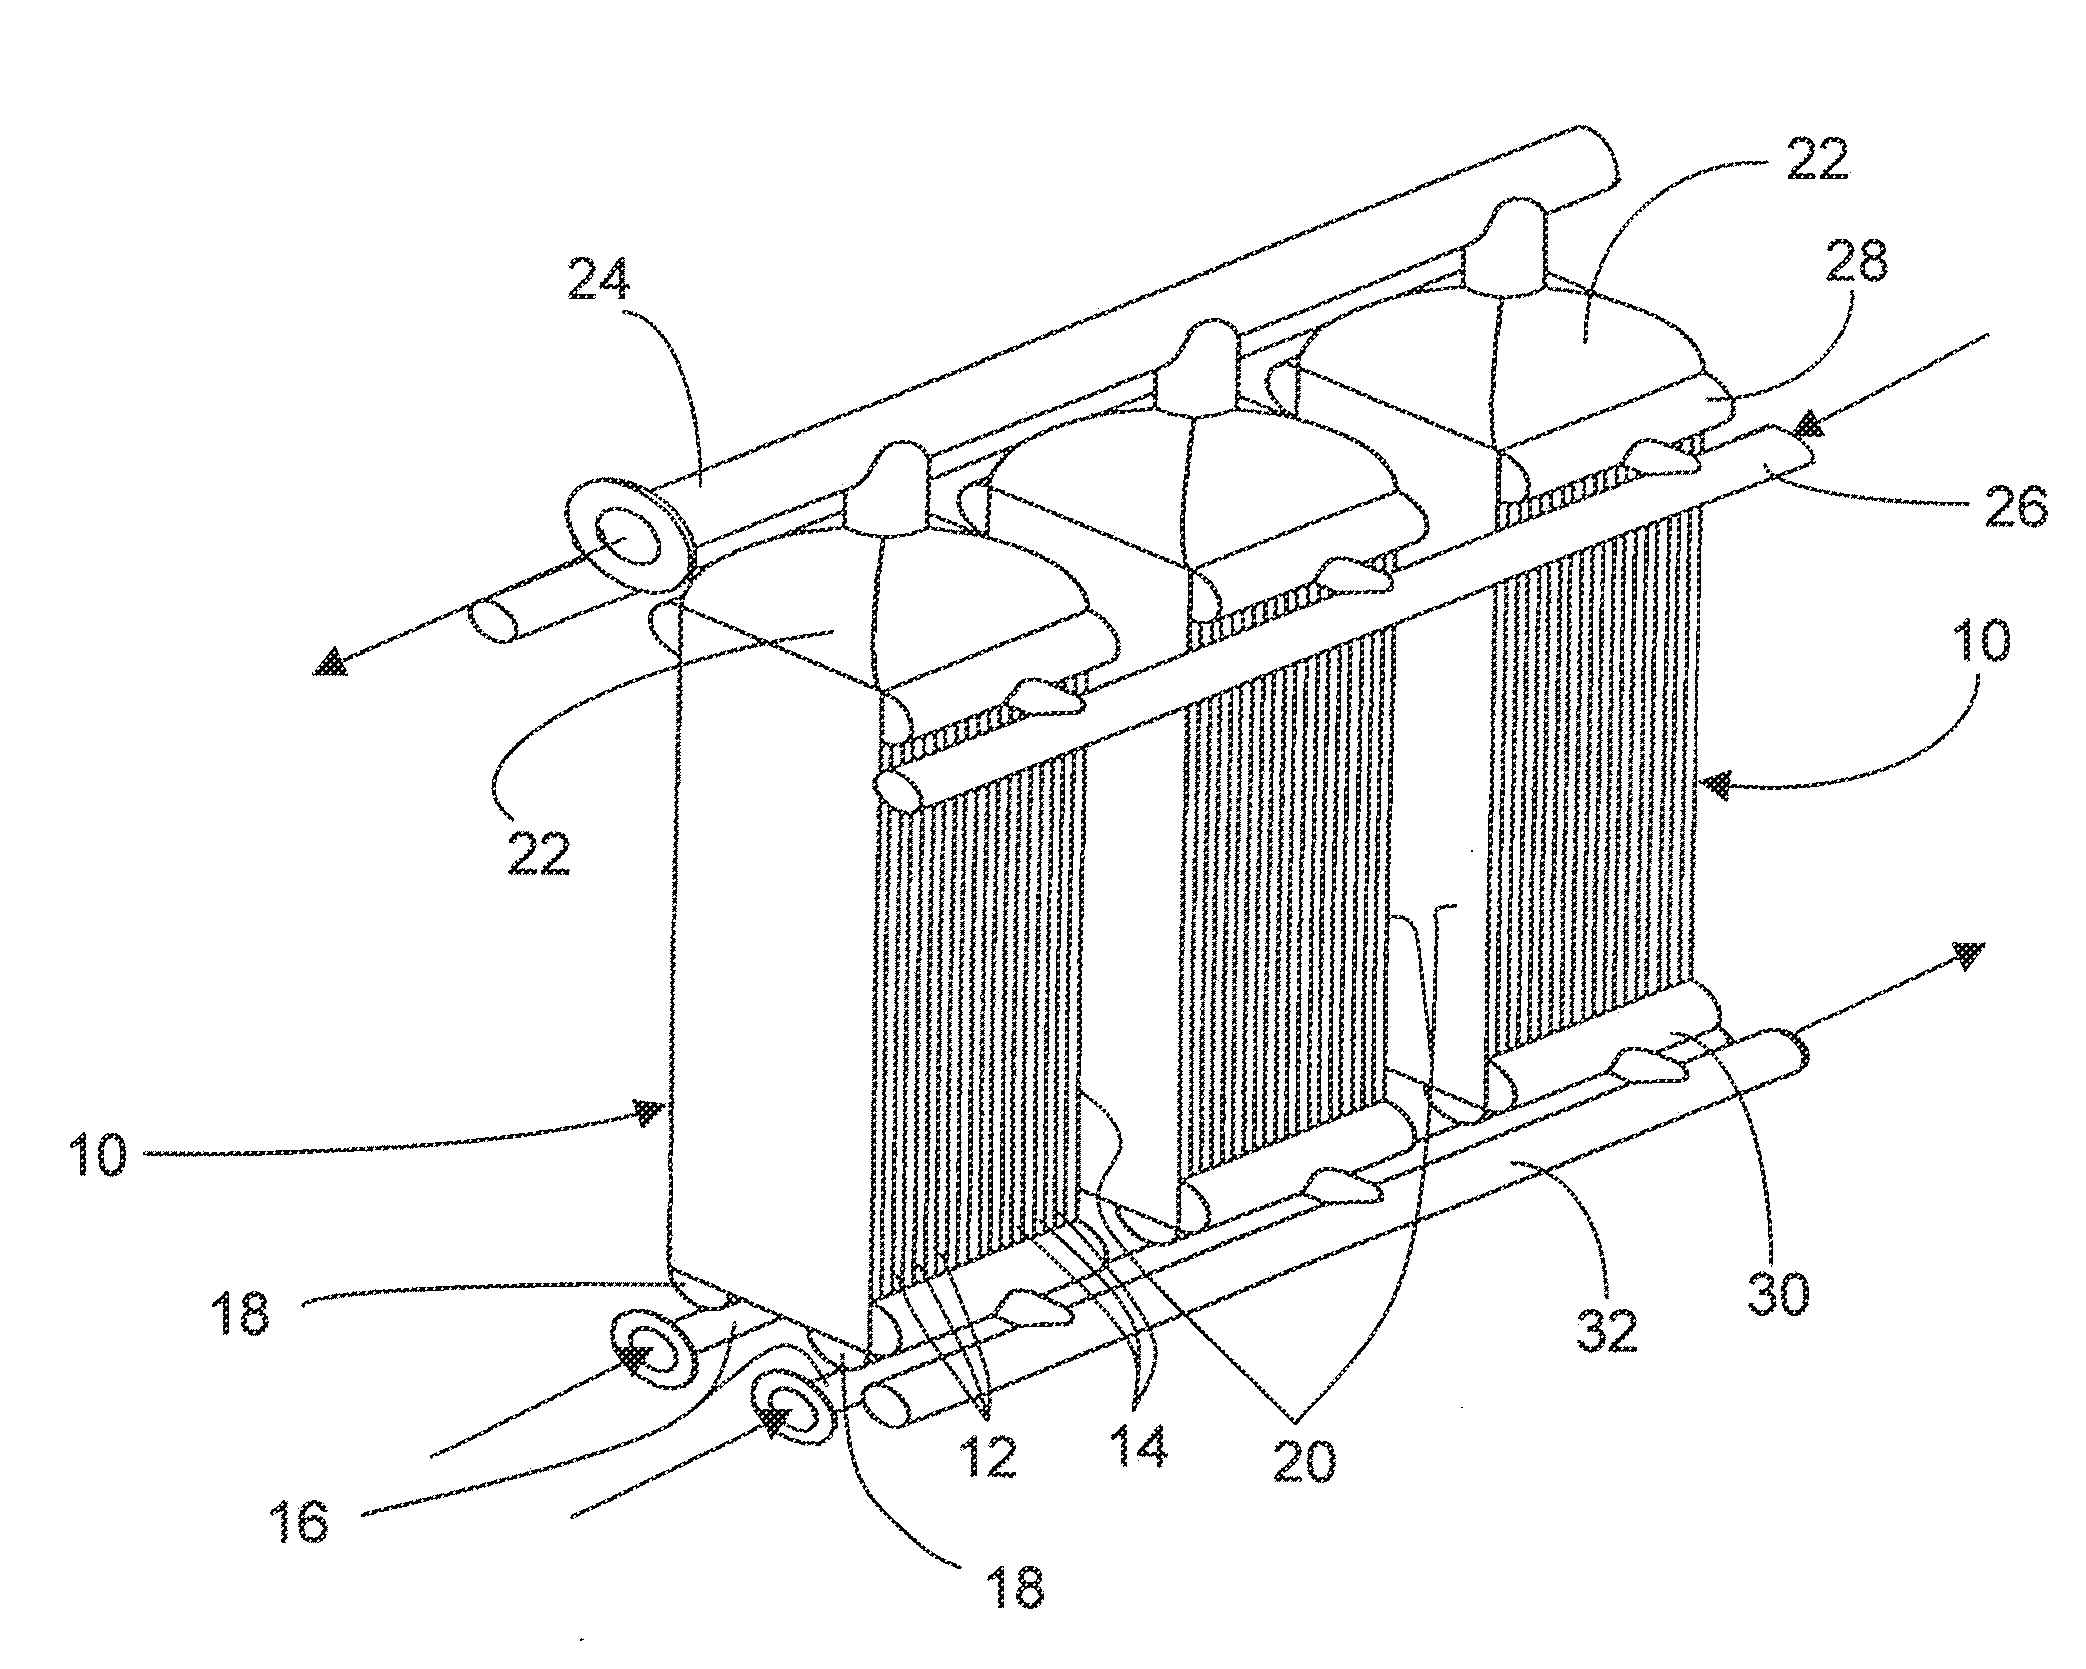 Method for making brazed aluminum heat exchanger and apparatus